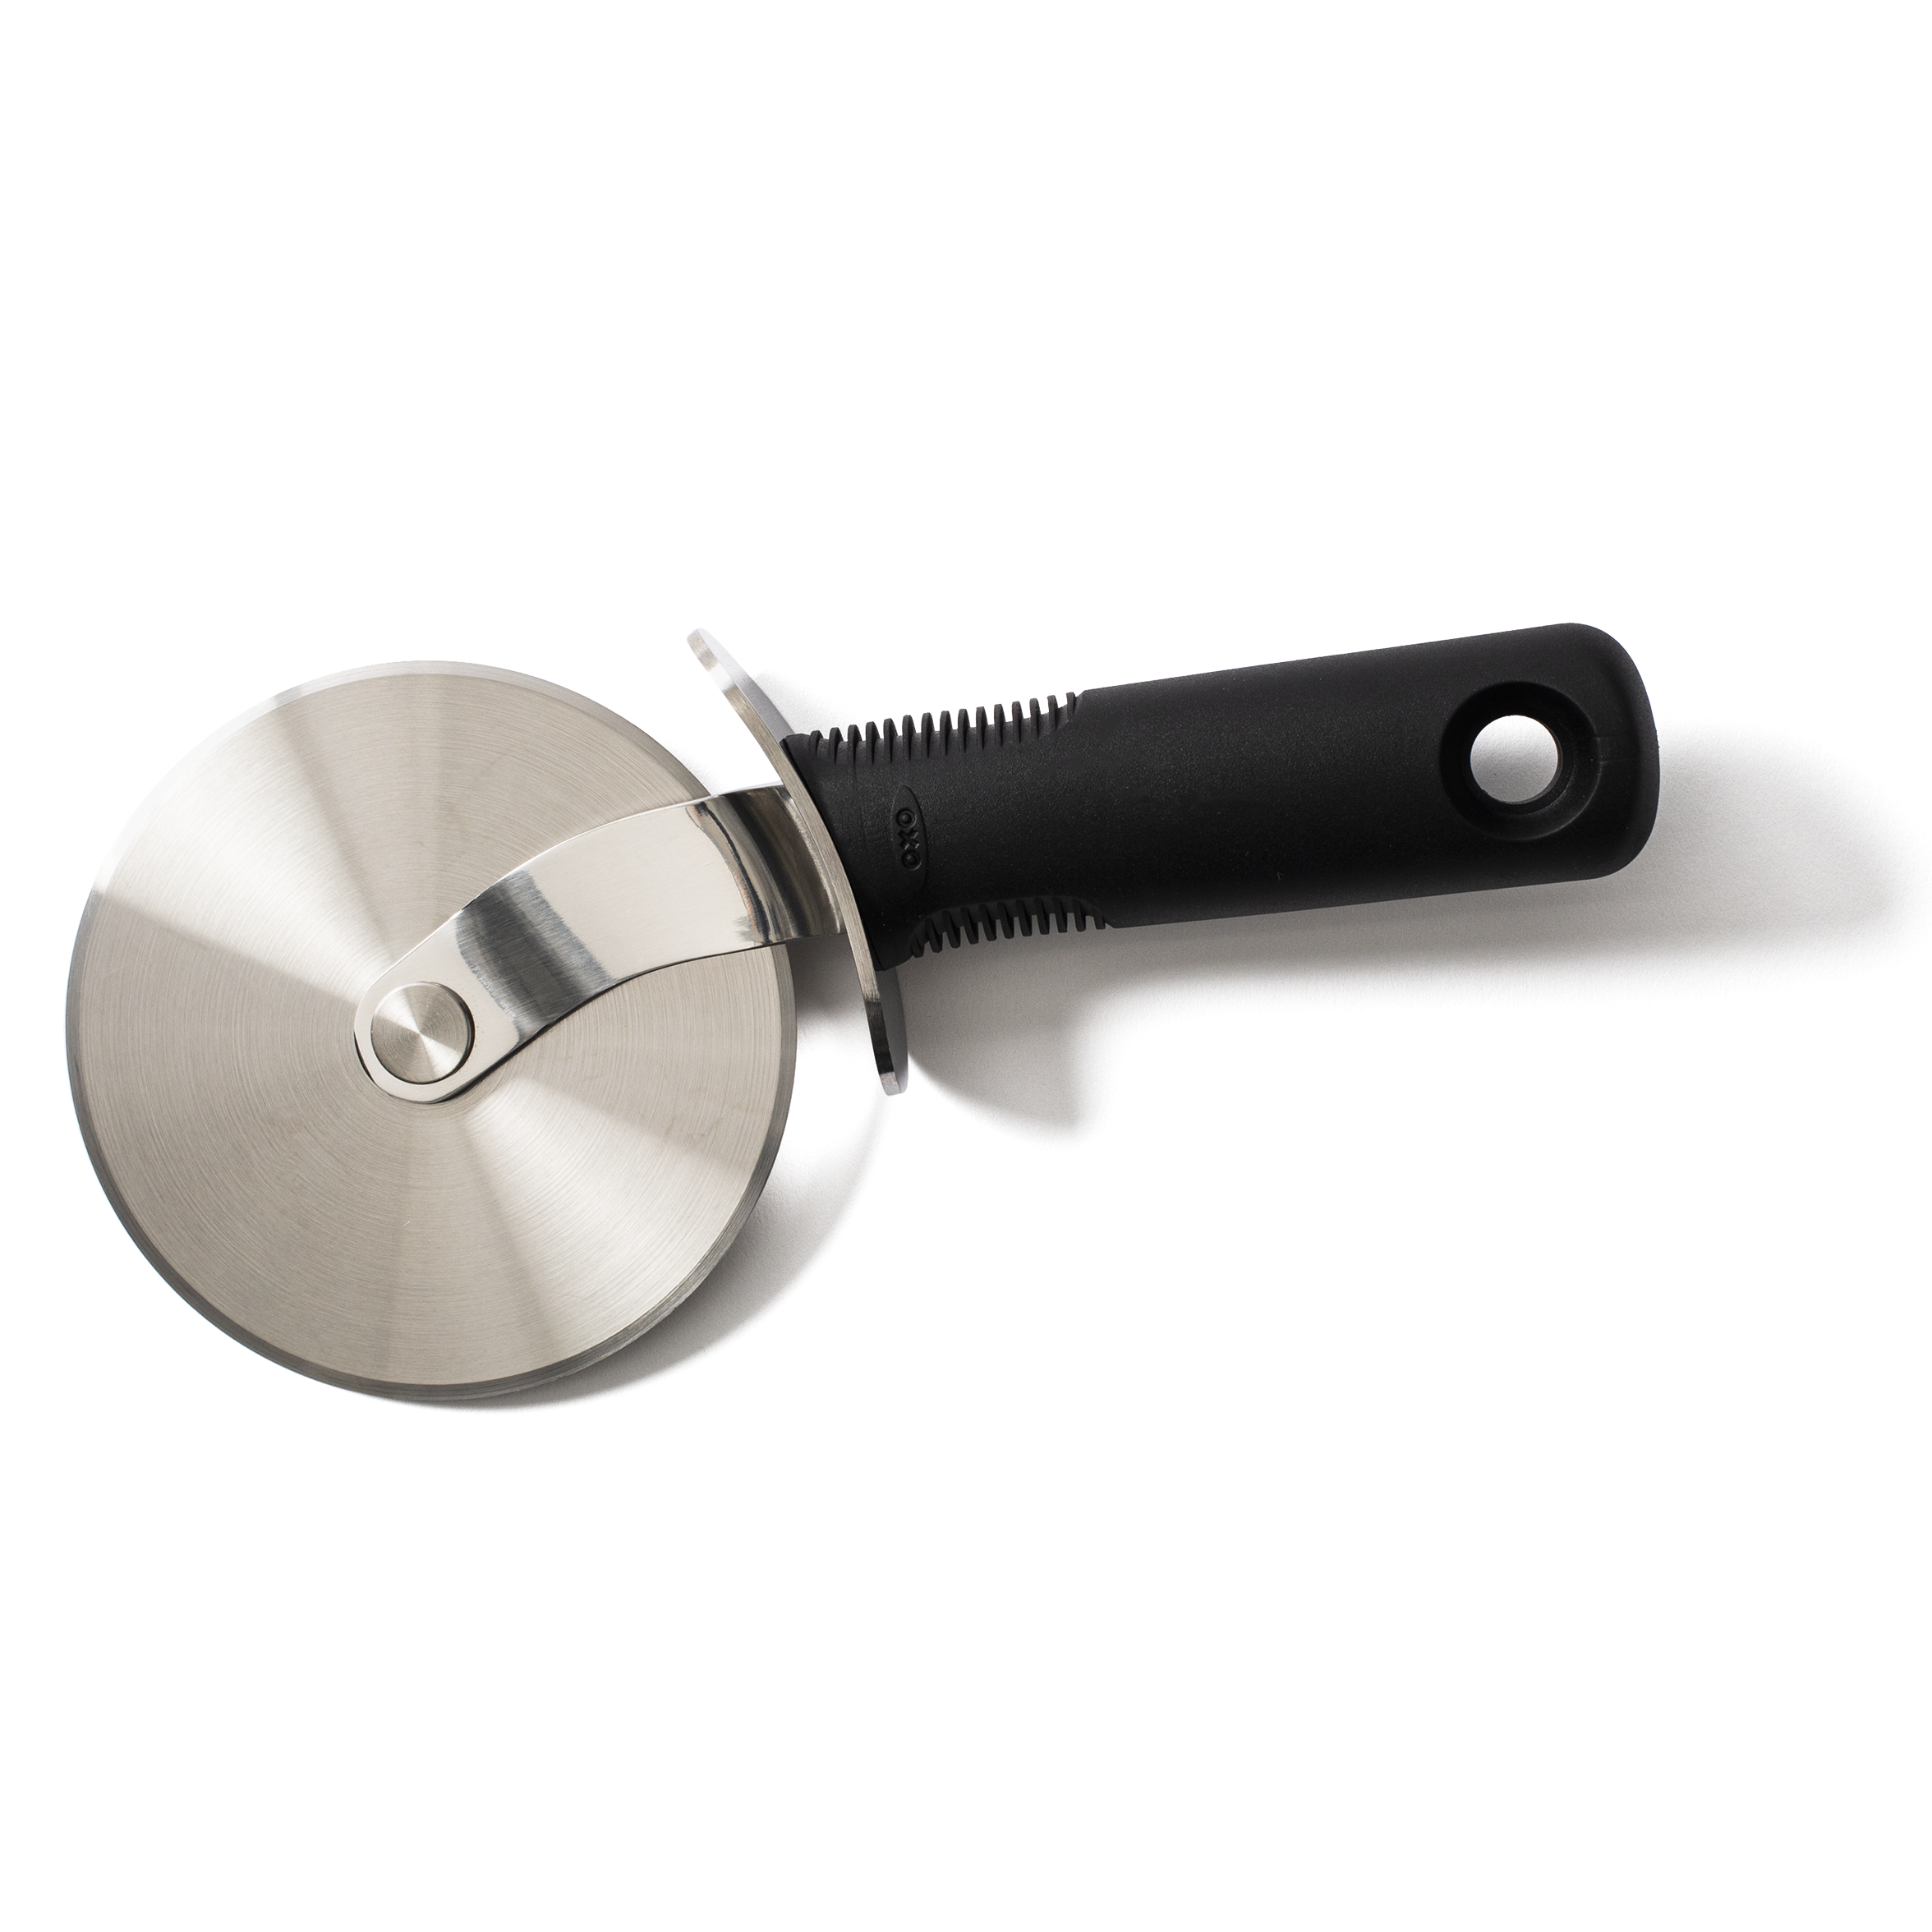 https://res.cloudinary.com/hksqkdlah/image/upload/SIL_Pizza-Cutter_OXO_4-Inch-Pizza-Wheel-and-Cutter_11301000_9460_ewvnbl.png